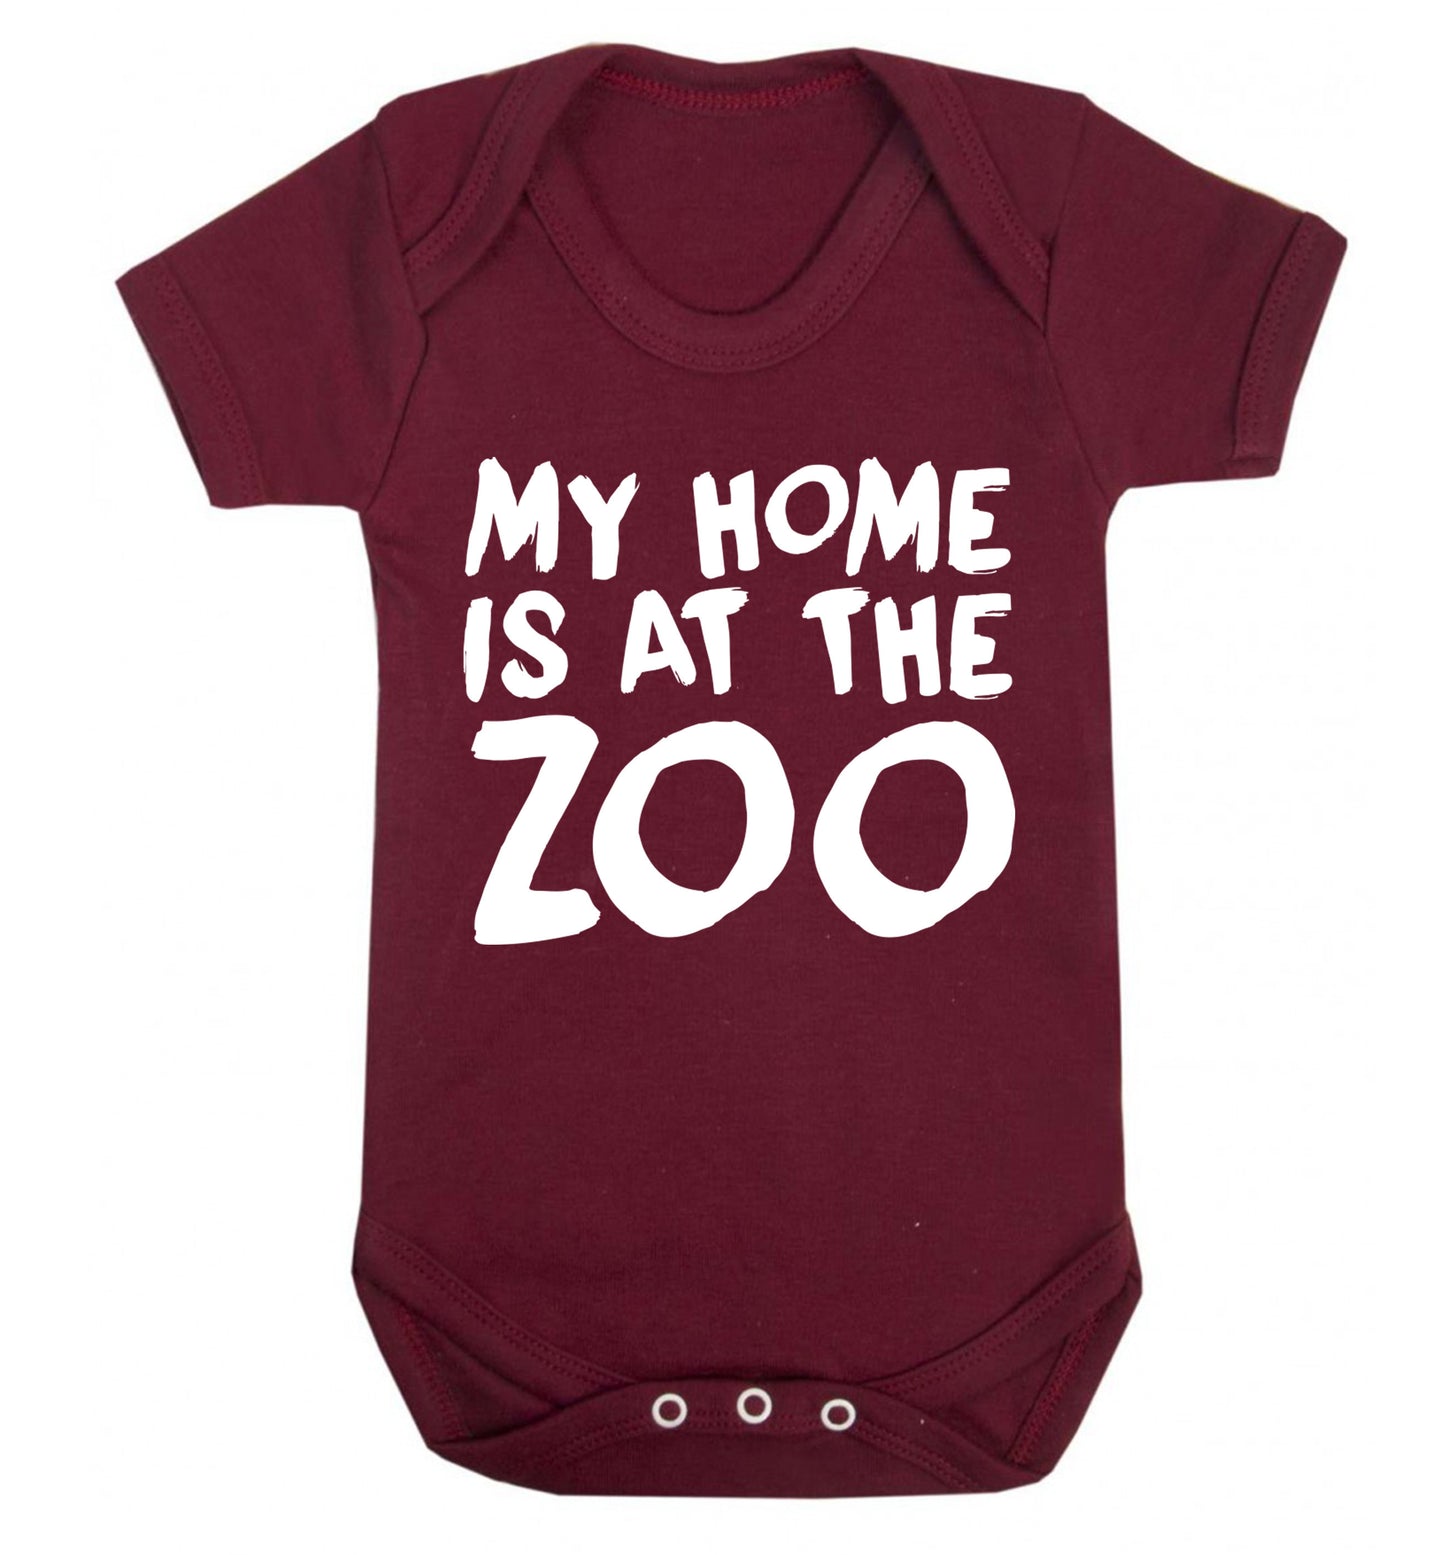 My home is at the zoo Baby Vest maroon 18-24 months